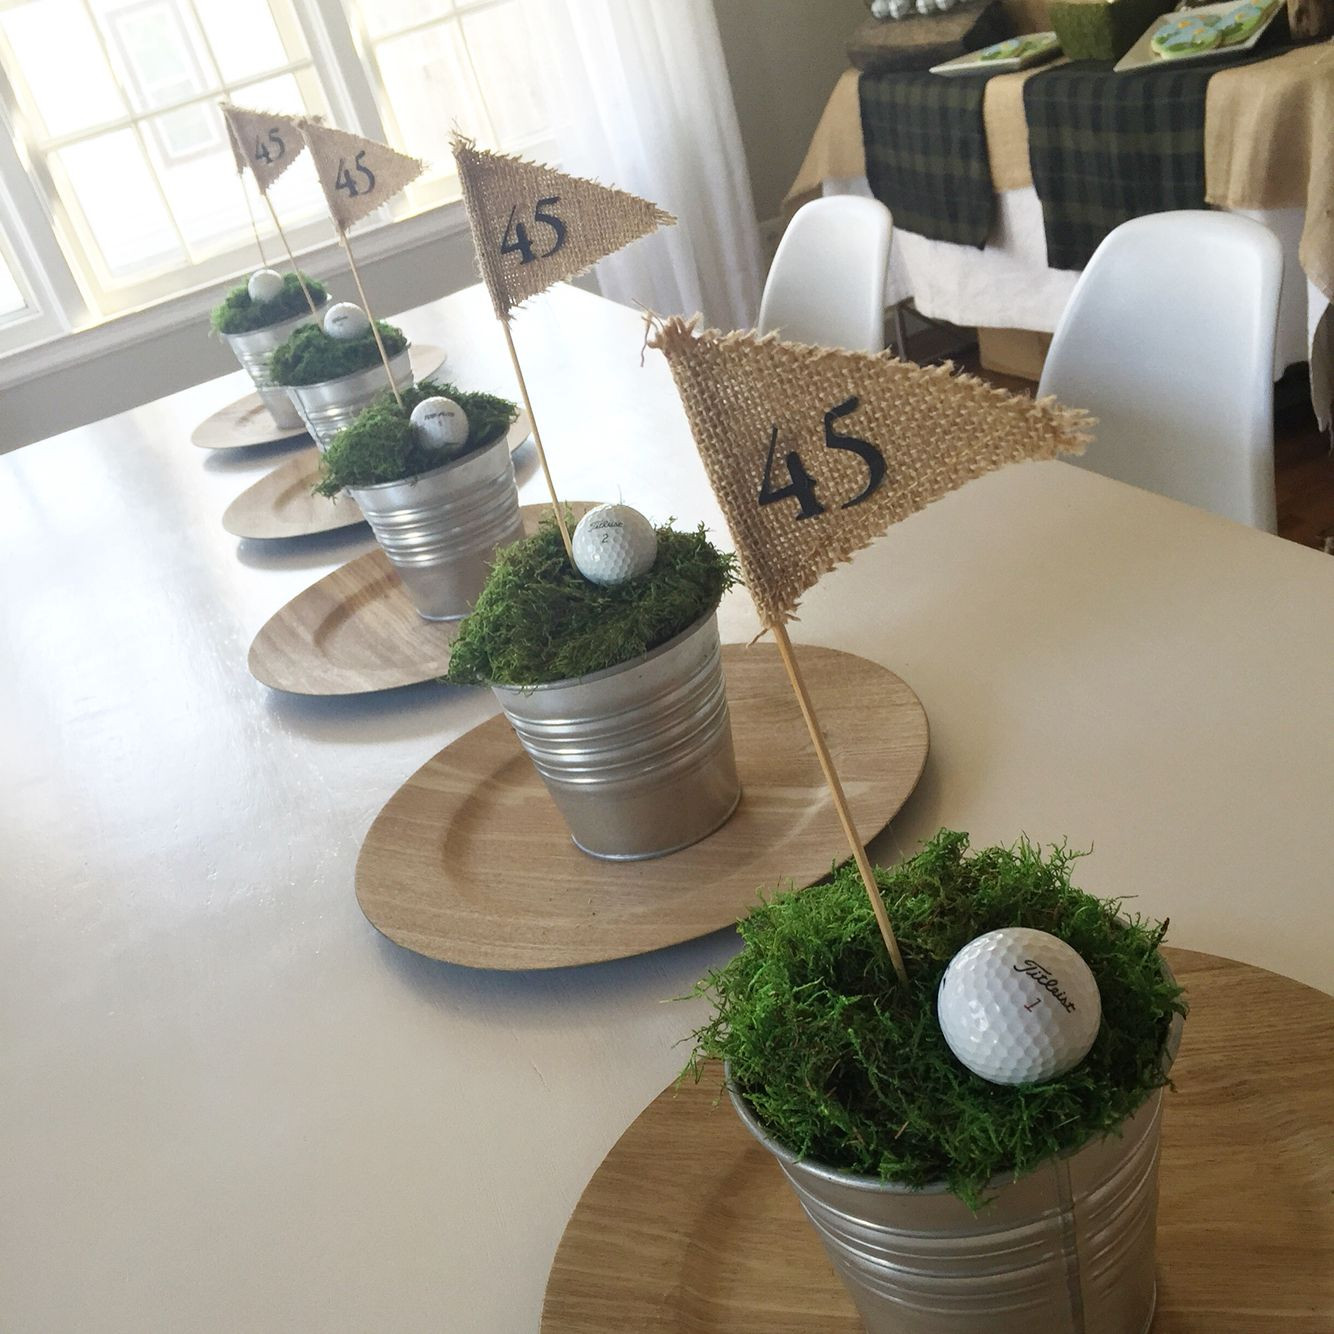 Golf Themed Retirement Party Ideas
 Golf centerpieces More … in 2019